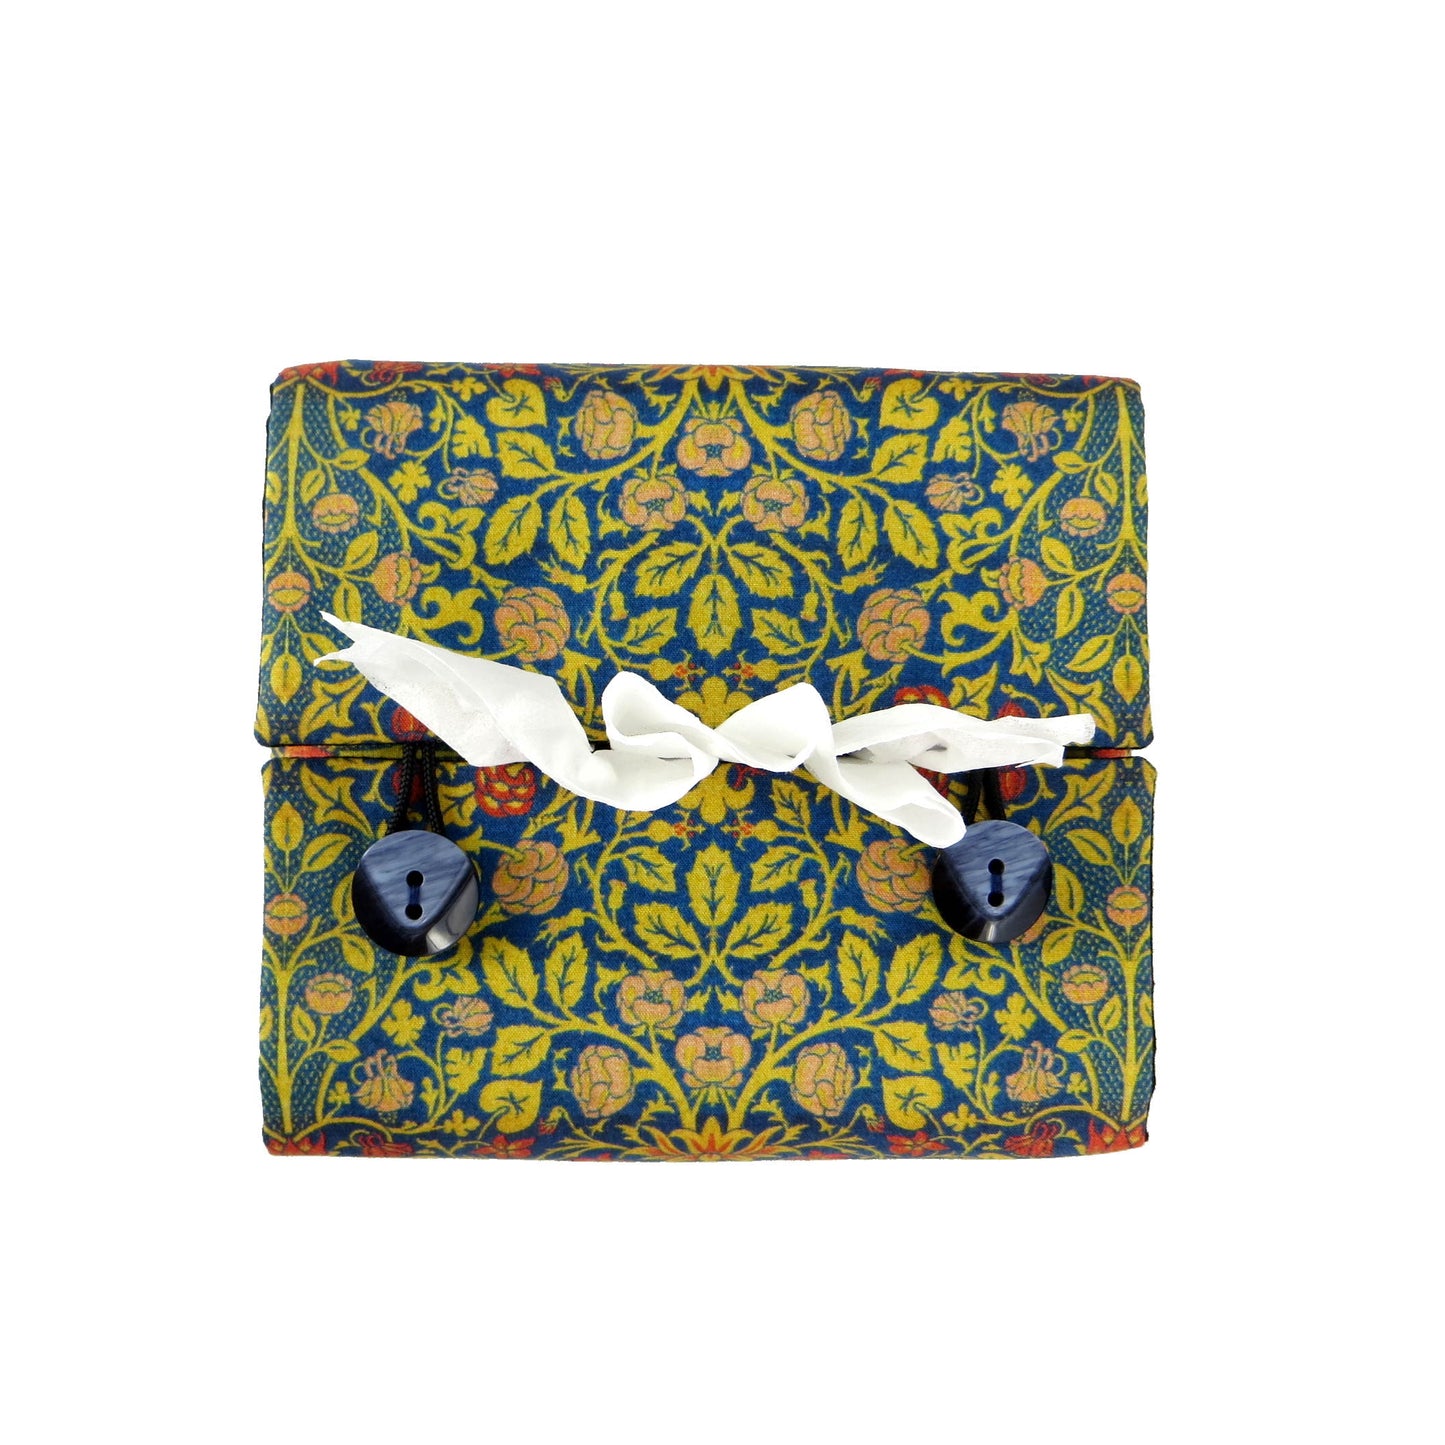 Cube tissue box cover with orange flowers and yellow vines design on blue background